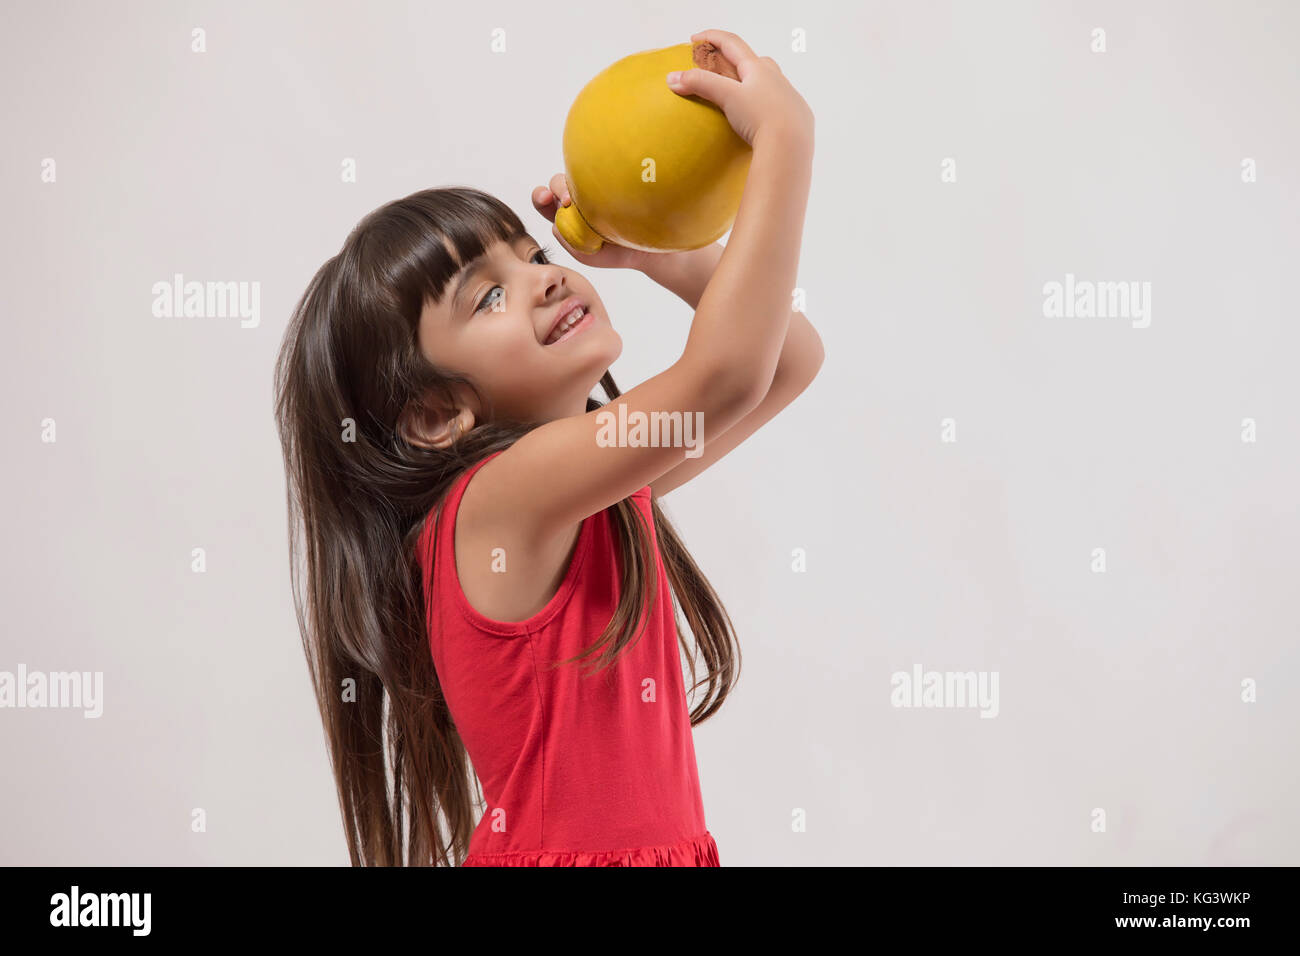 Girl looking at piggy bank while standing against white background Stock Photo